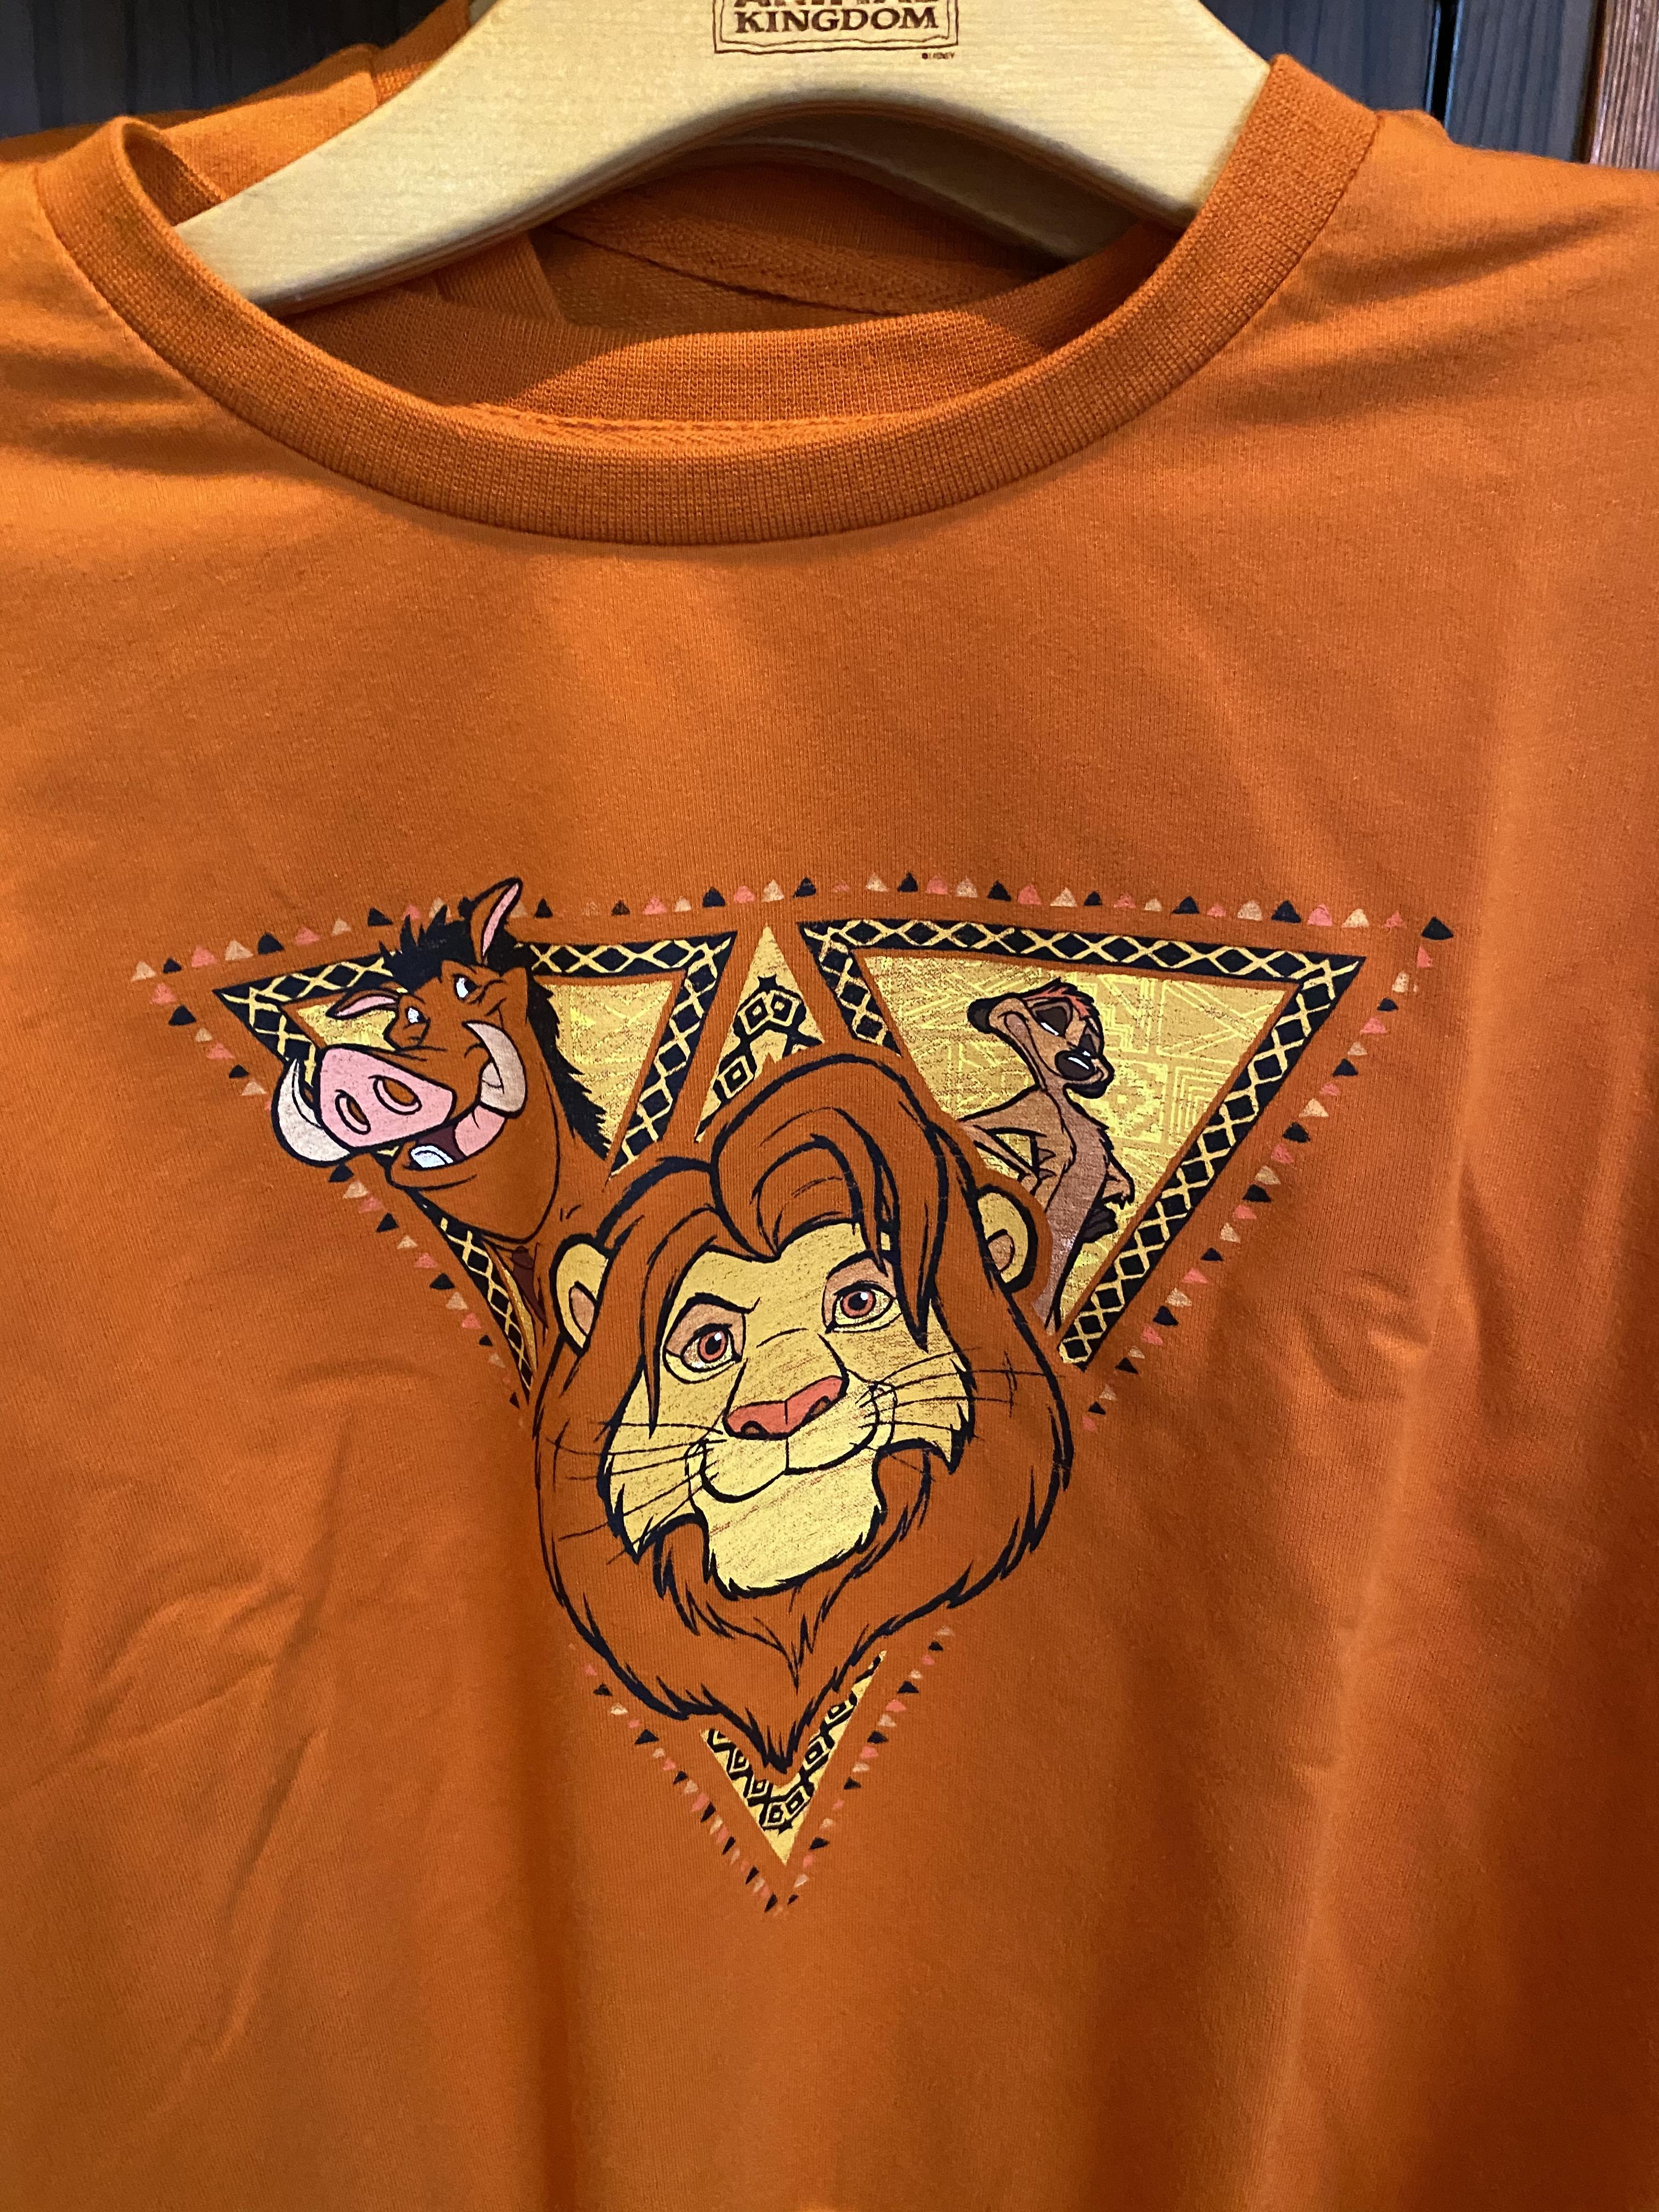 There's a New Long Sleeve Lion King Shirt Prowling Around